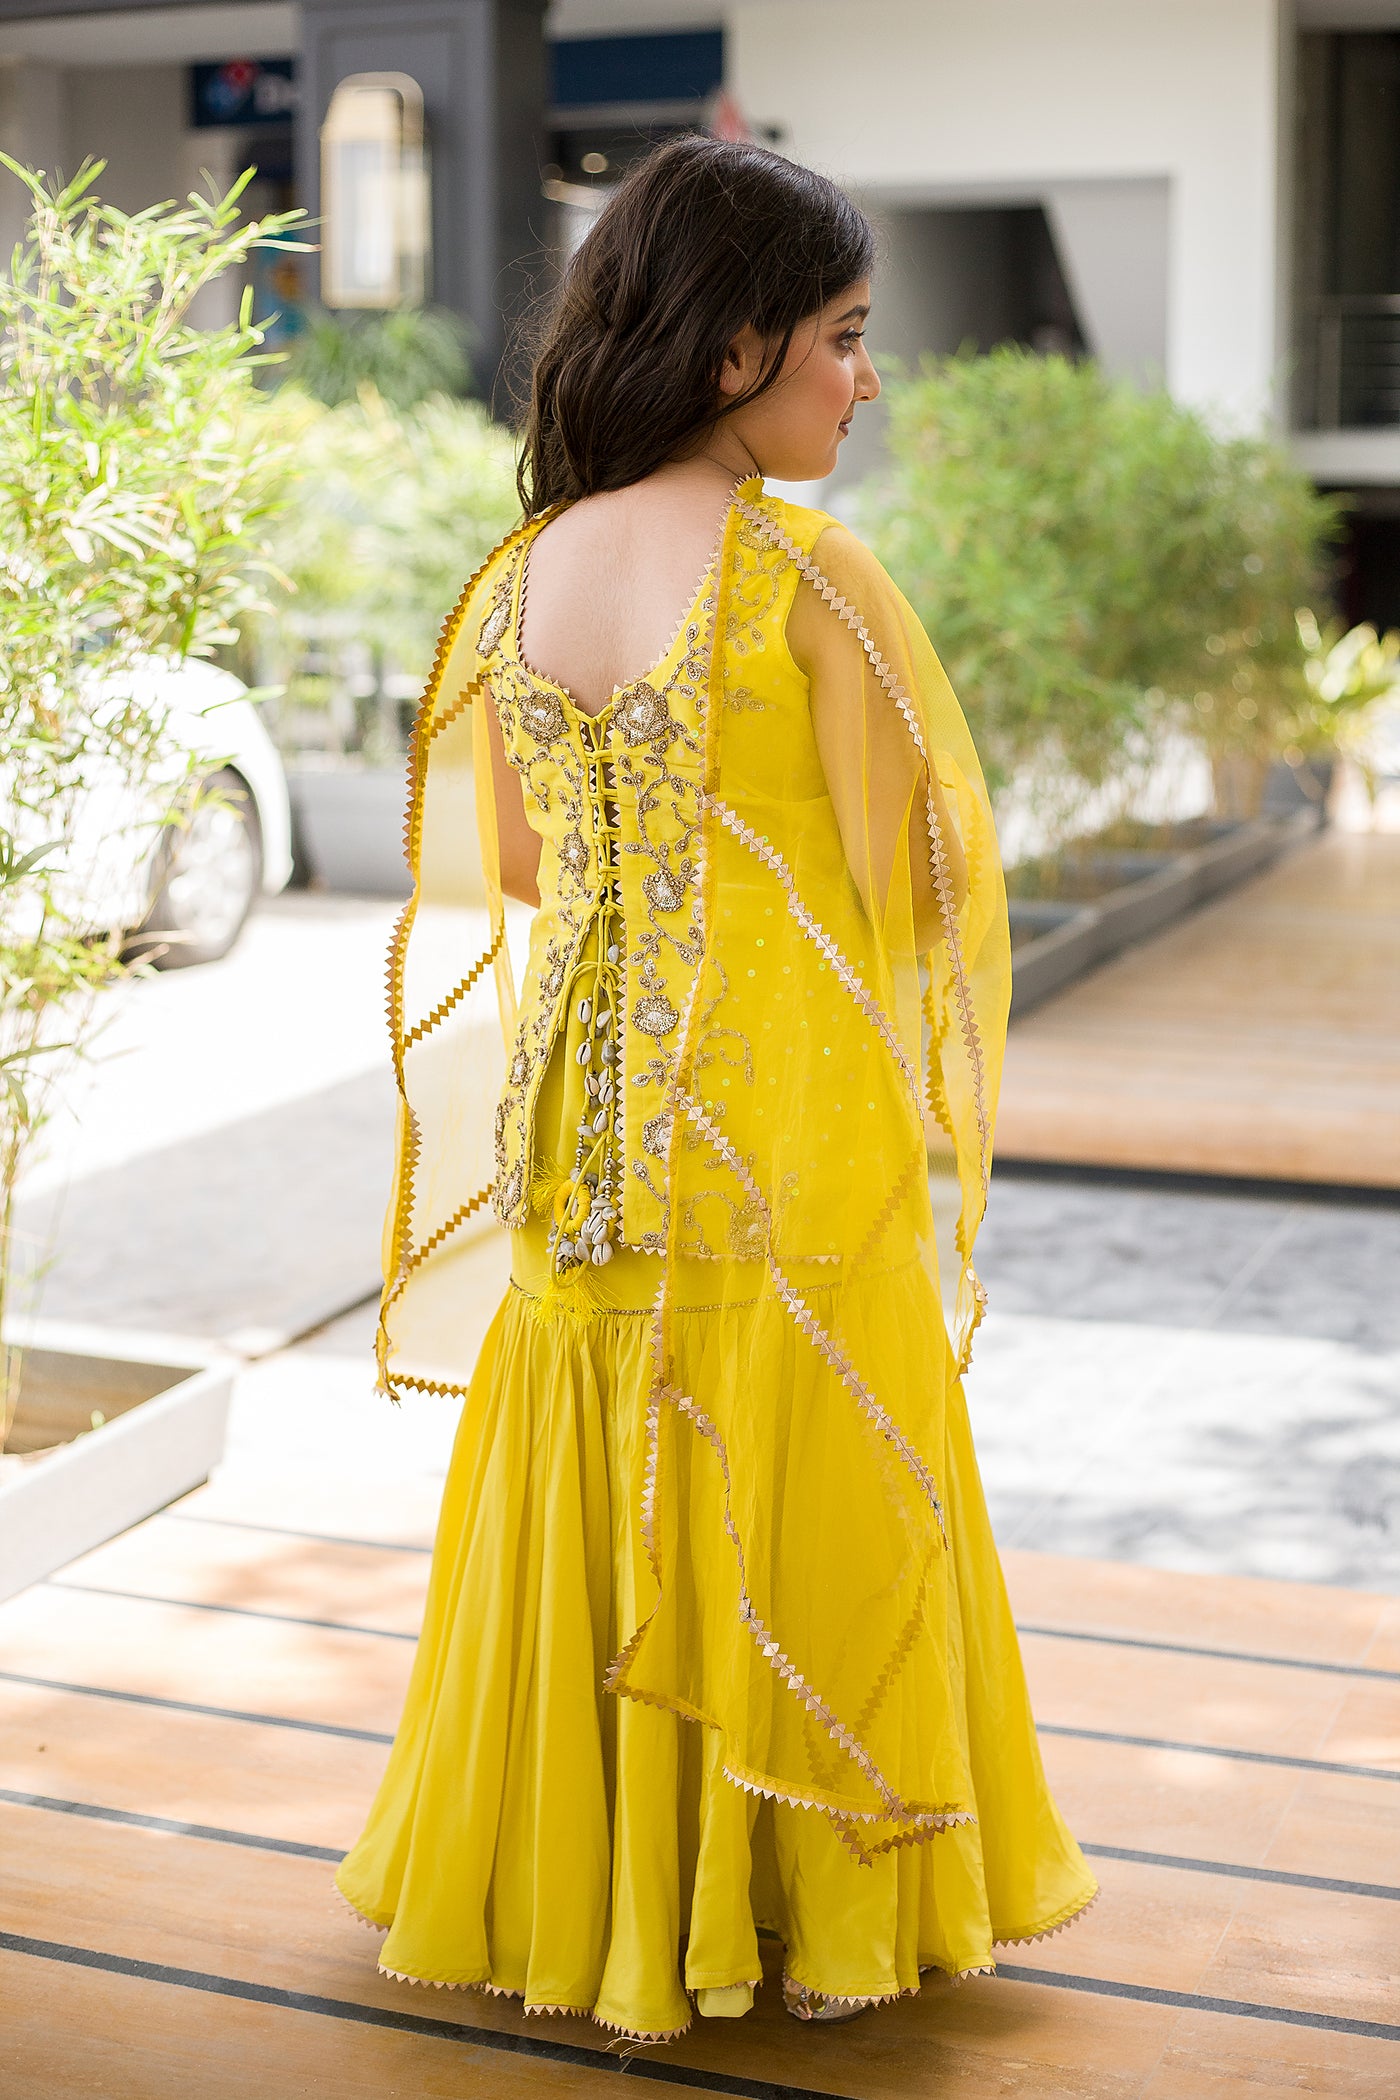 Girls' Yellow Embroidered Skirt Set Indian Clothing in Denver, CO, Aurora, CO, Boulder, CO, Fort Collins, CO, Colorado Springs, CO, Parker, CO, Highlands Ranch, CO, Cherry Creek, CO, Centennial, CO, and Longmont, CO. NATIONWIDE SHIPPING USA- India Fashion X